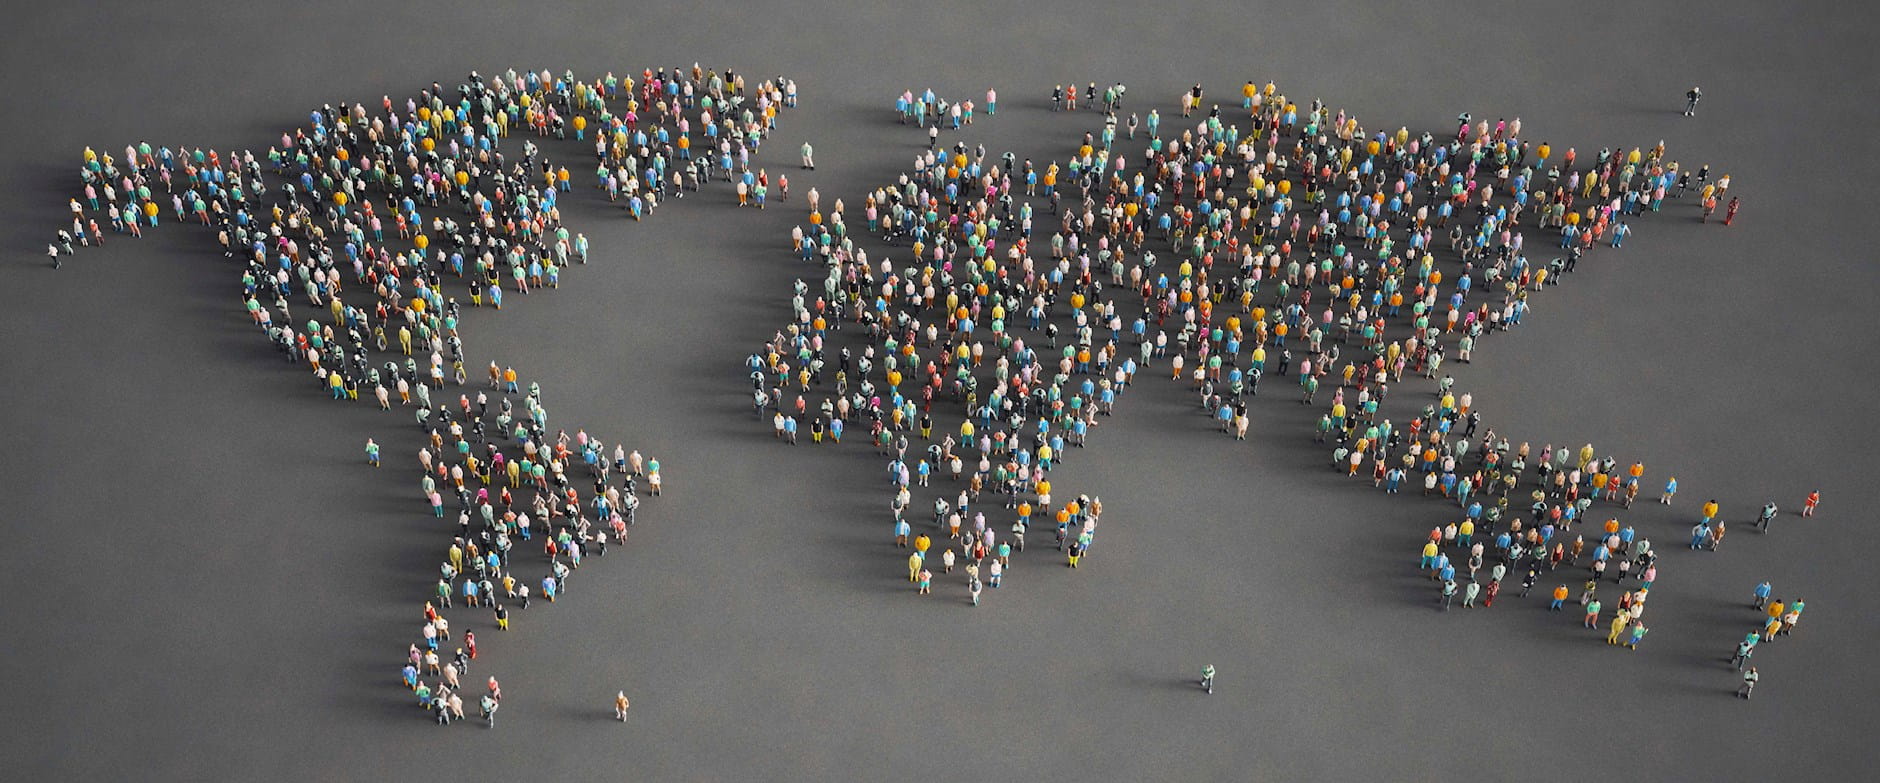 Low-poly people form a world map